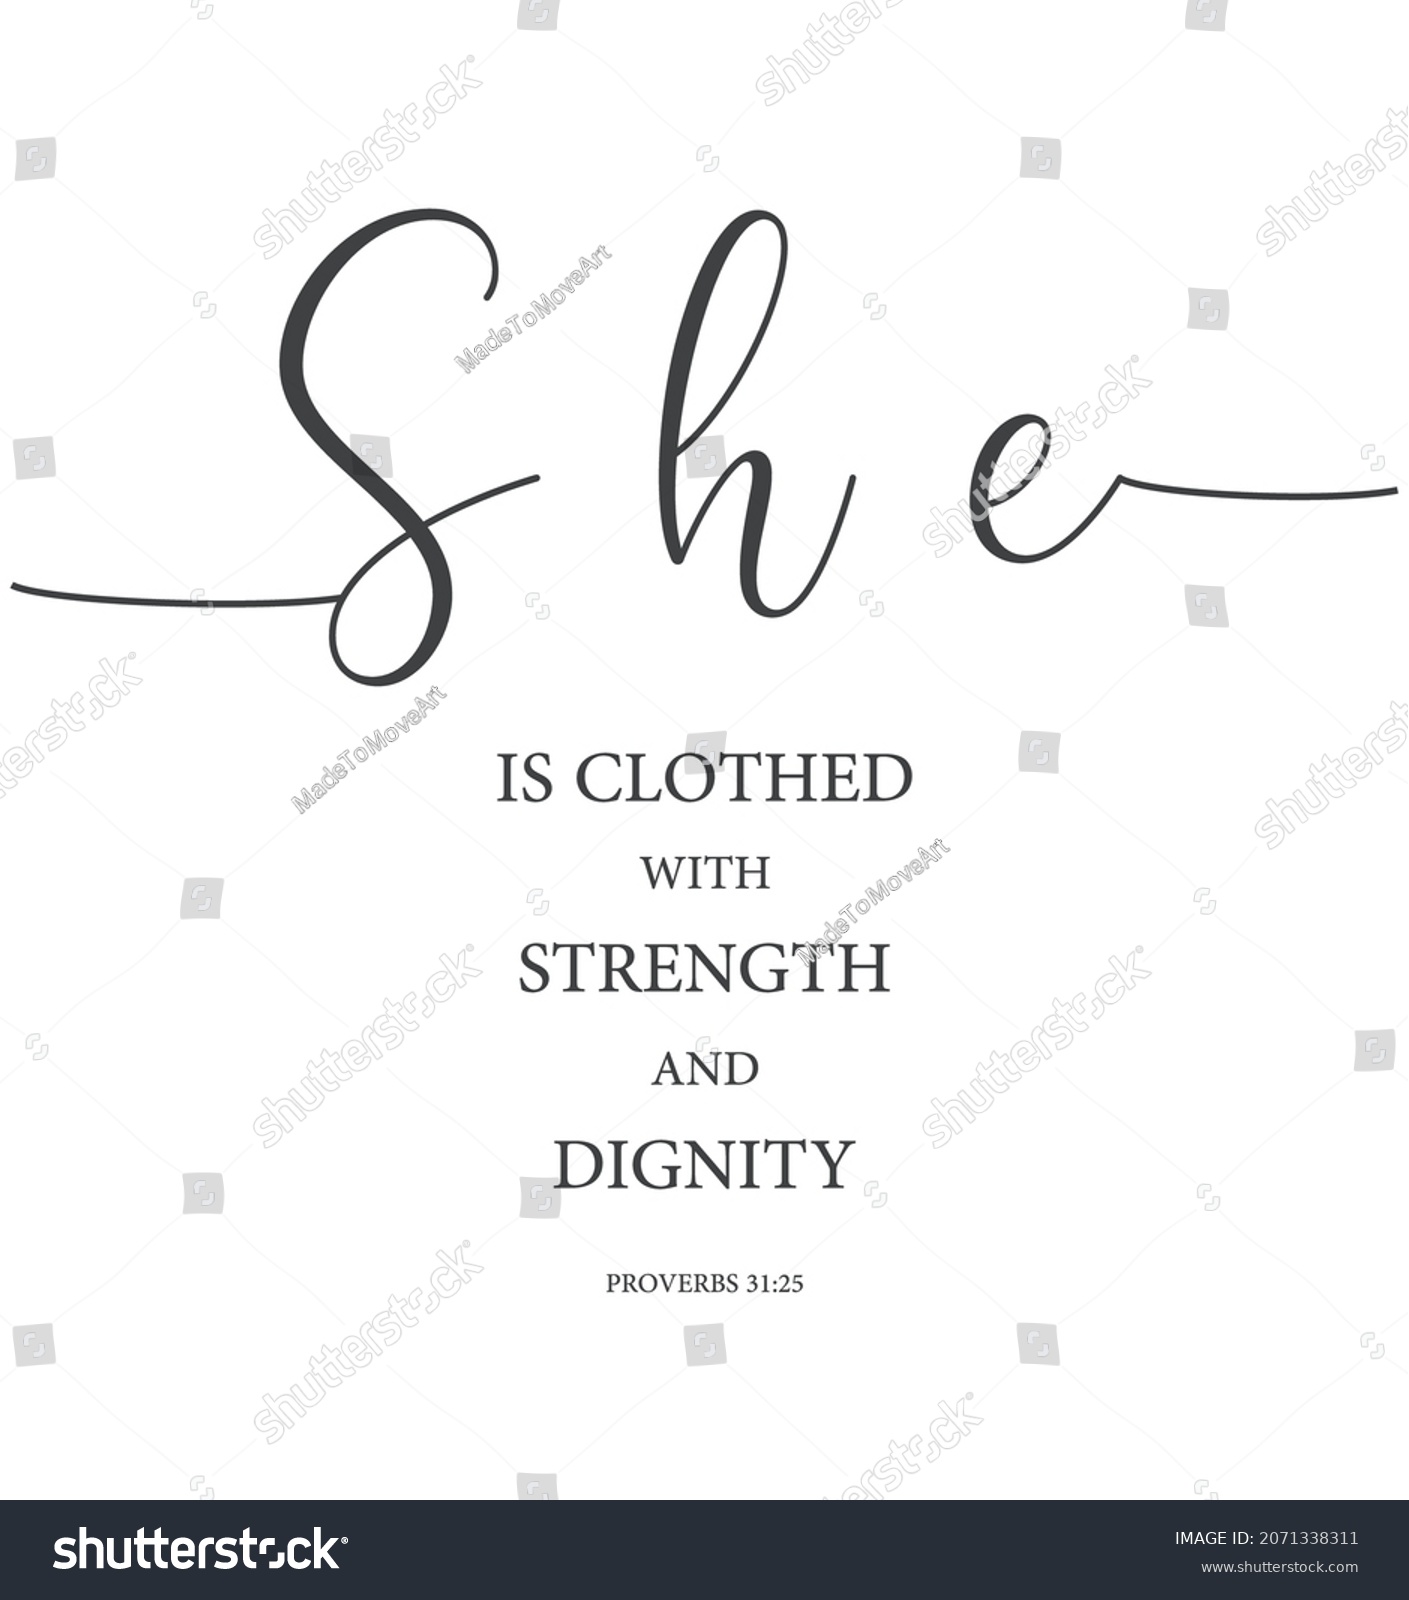 She Clothed Strength Dignity Proverbs 3125 Stock Vector Royalty Free 2071338311 Shutterstock